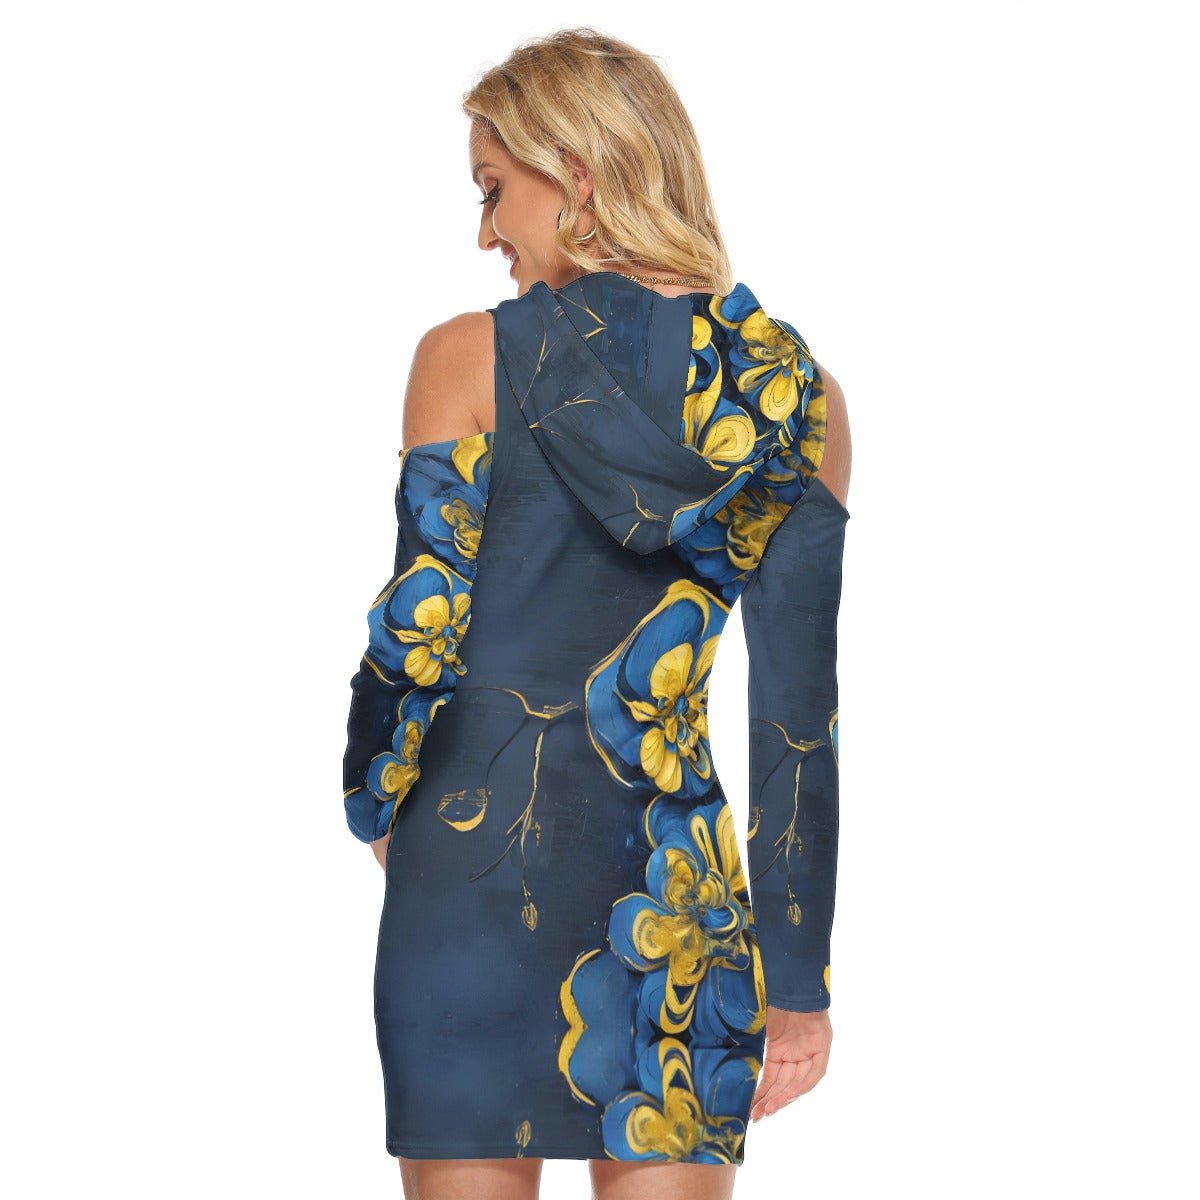 BloomFit Floral Bodycon Dress: Women's Chic and Flattering Fashion